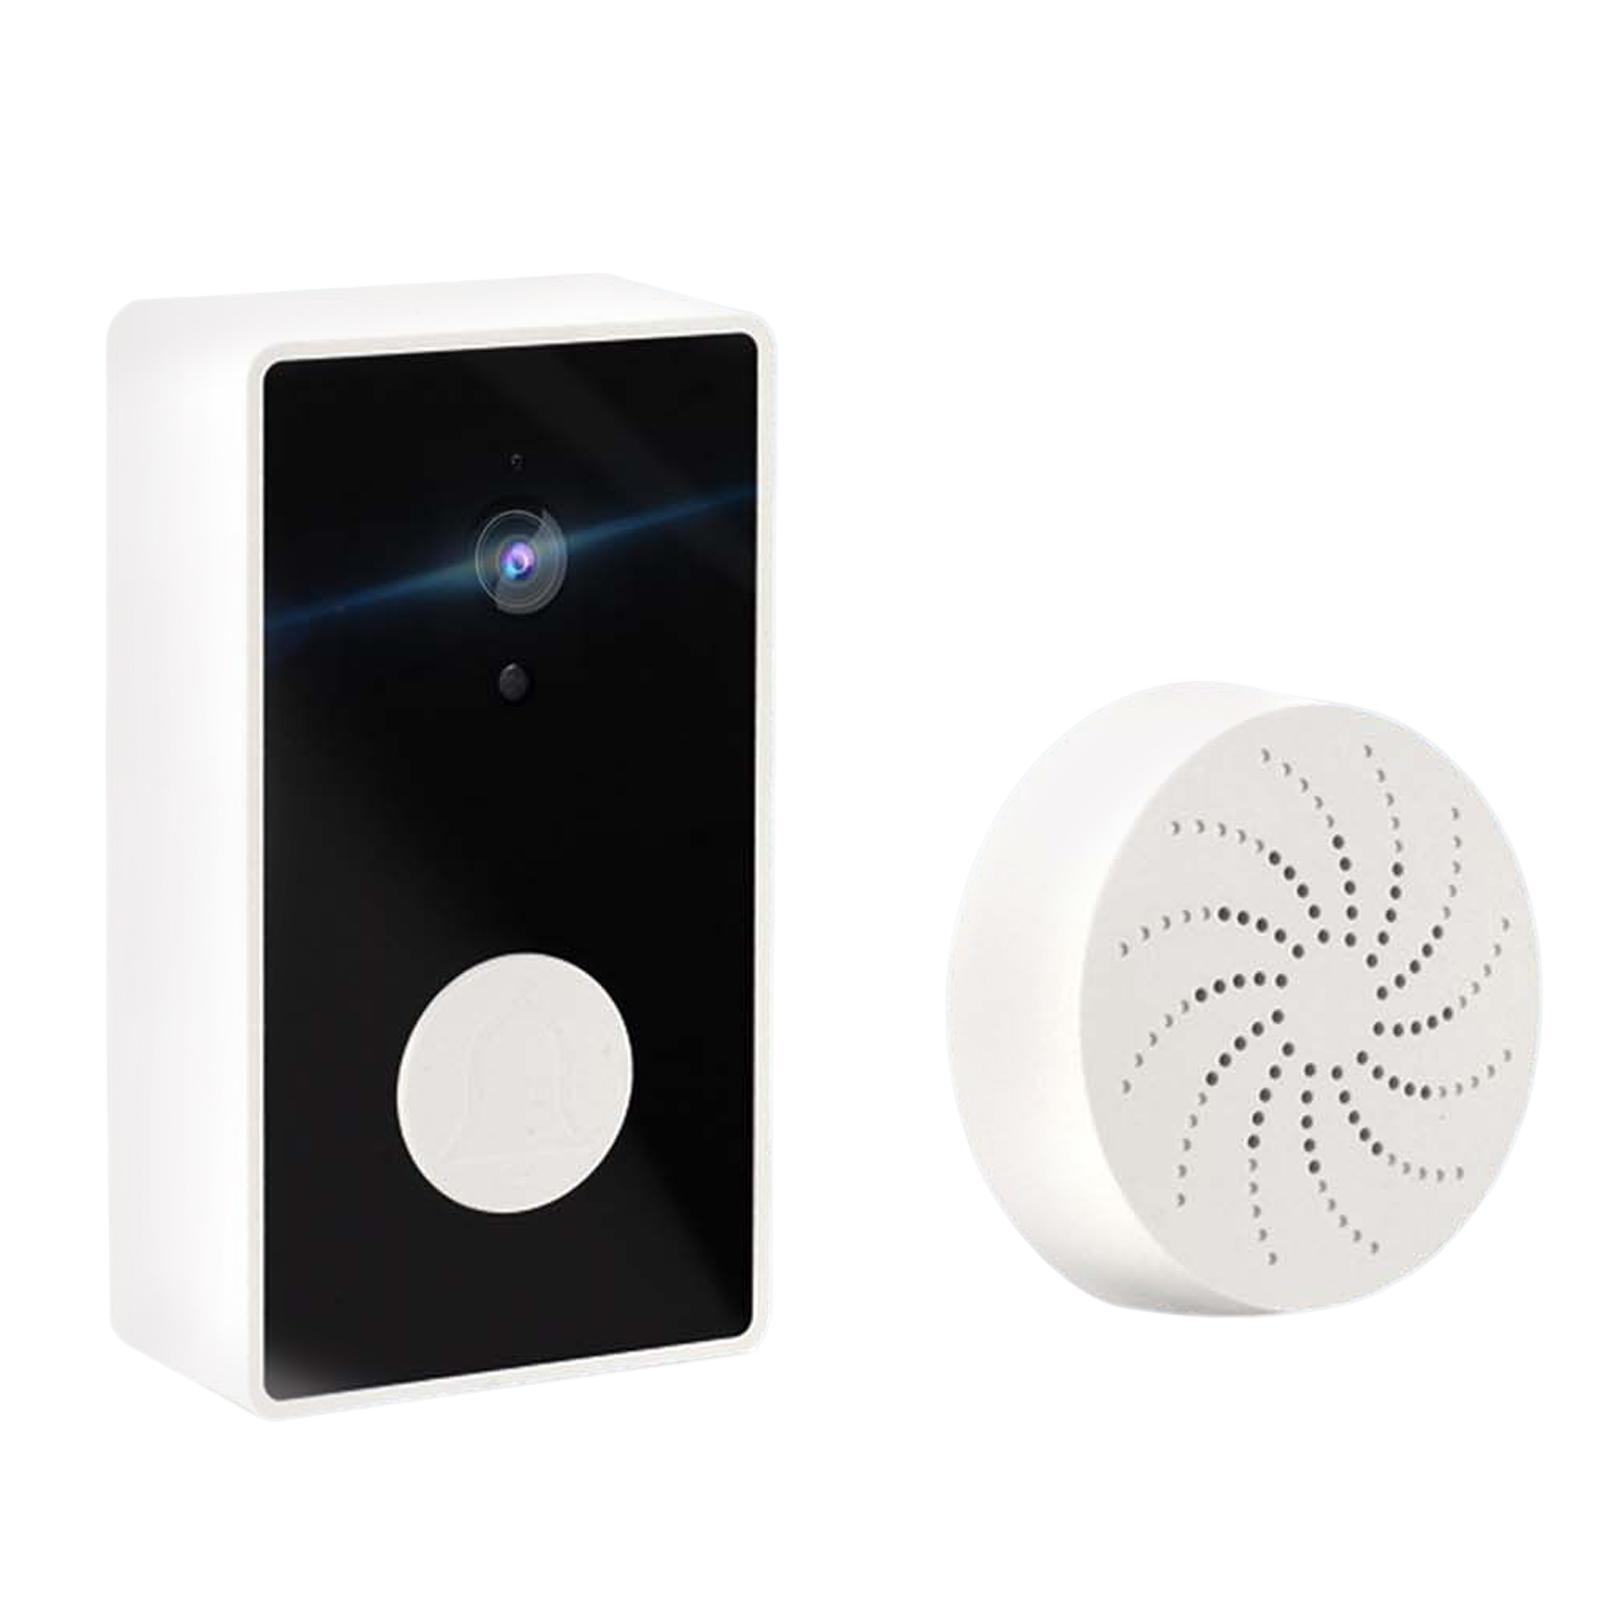 Wireless WiFi Video Doorbell Camera Wide Angle Motion Detection for Home